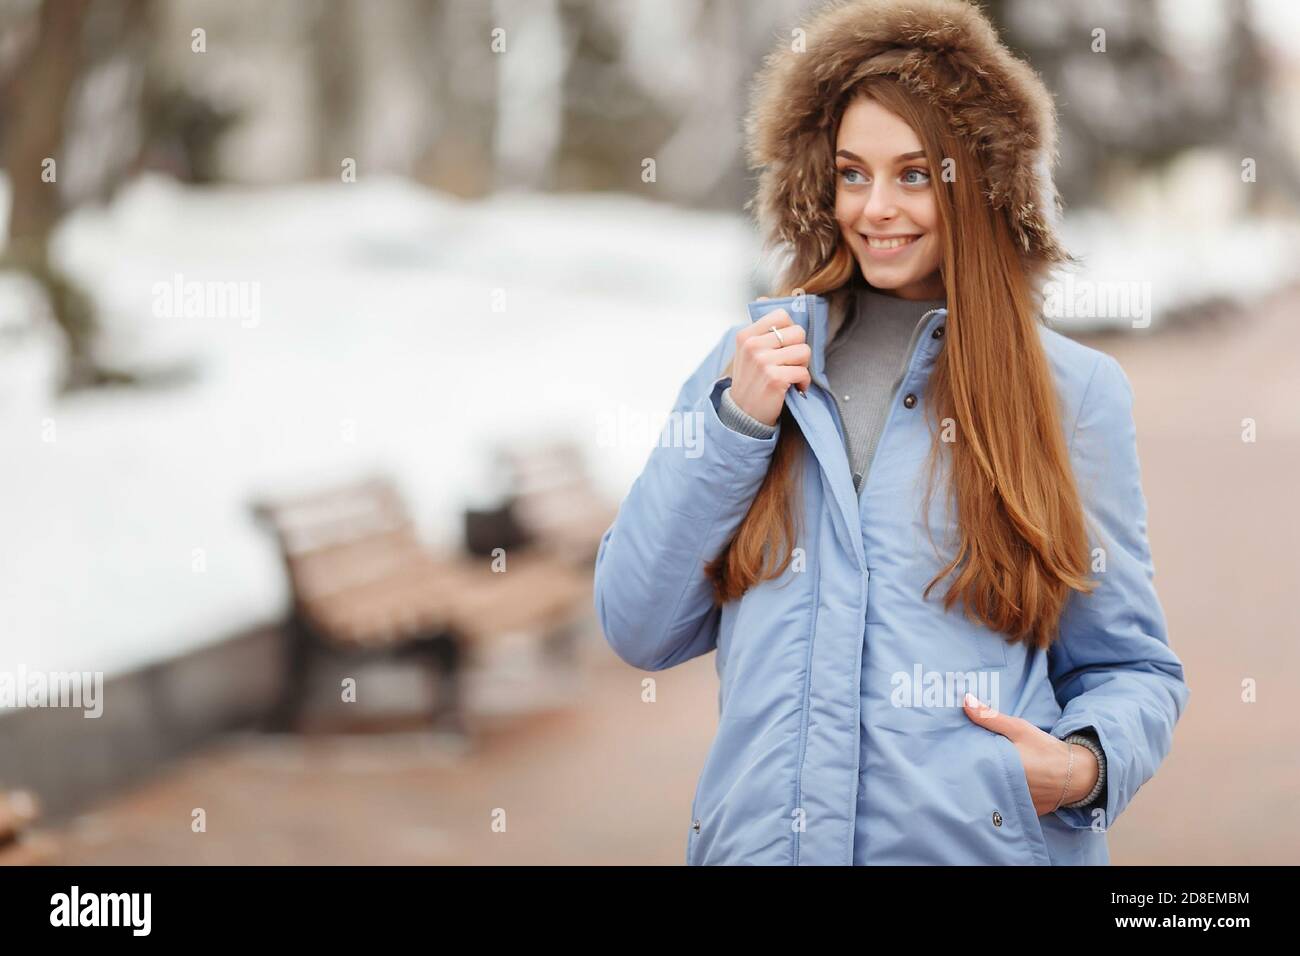 Fashion Young Woman Winter Time Stock Photo 529150243